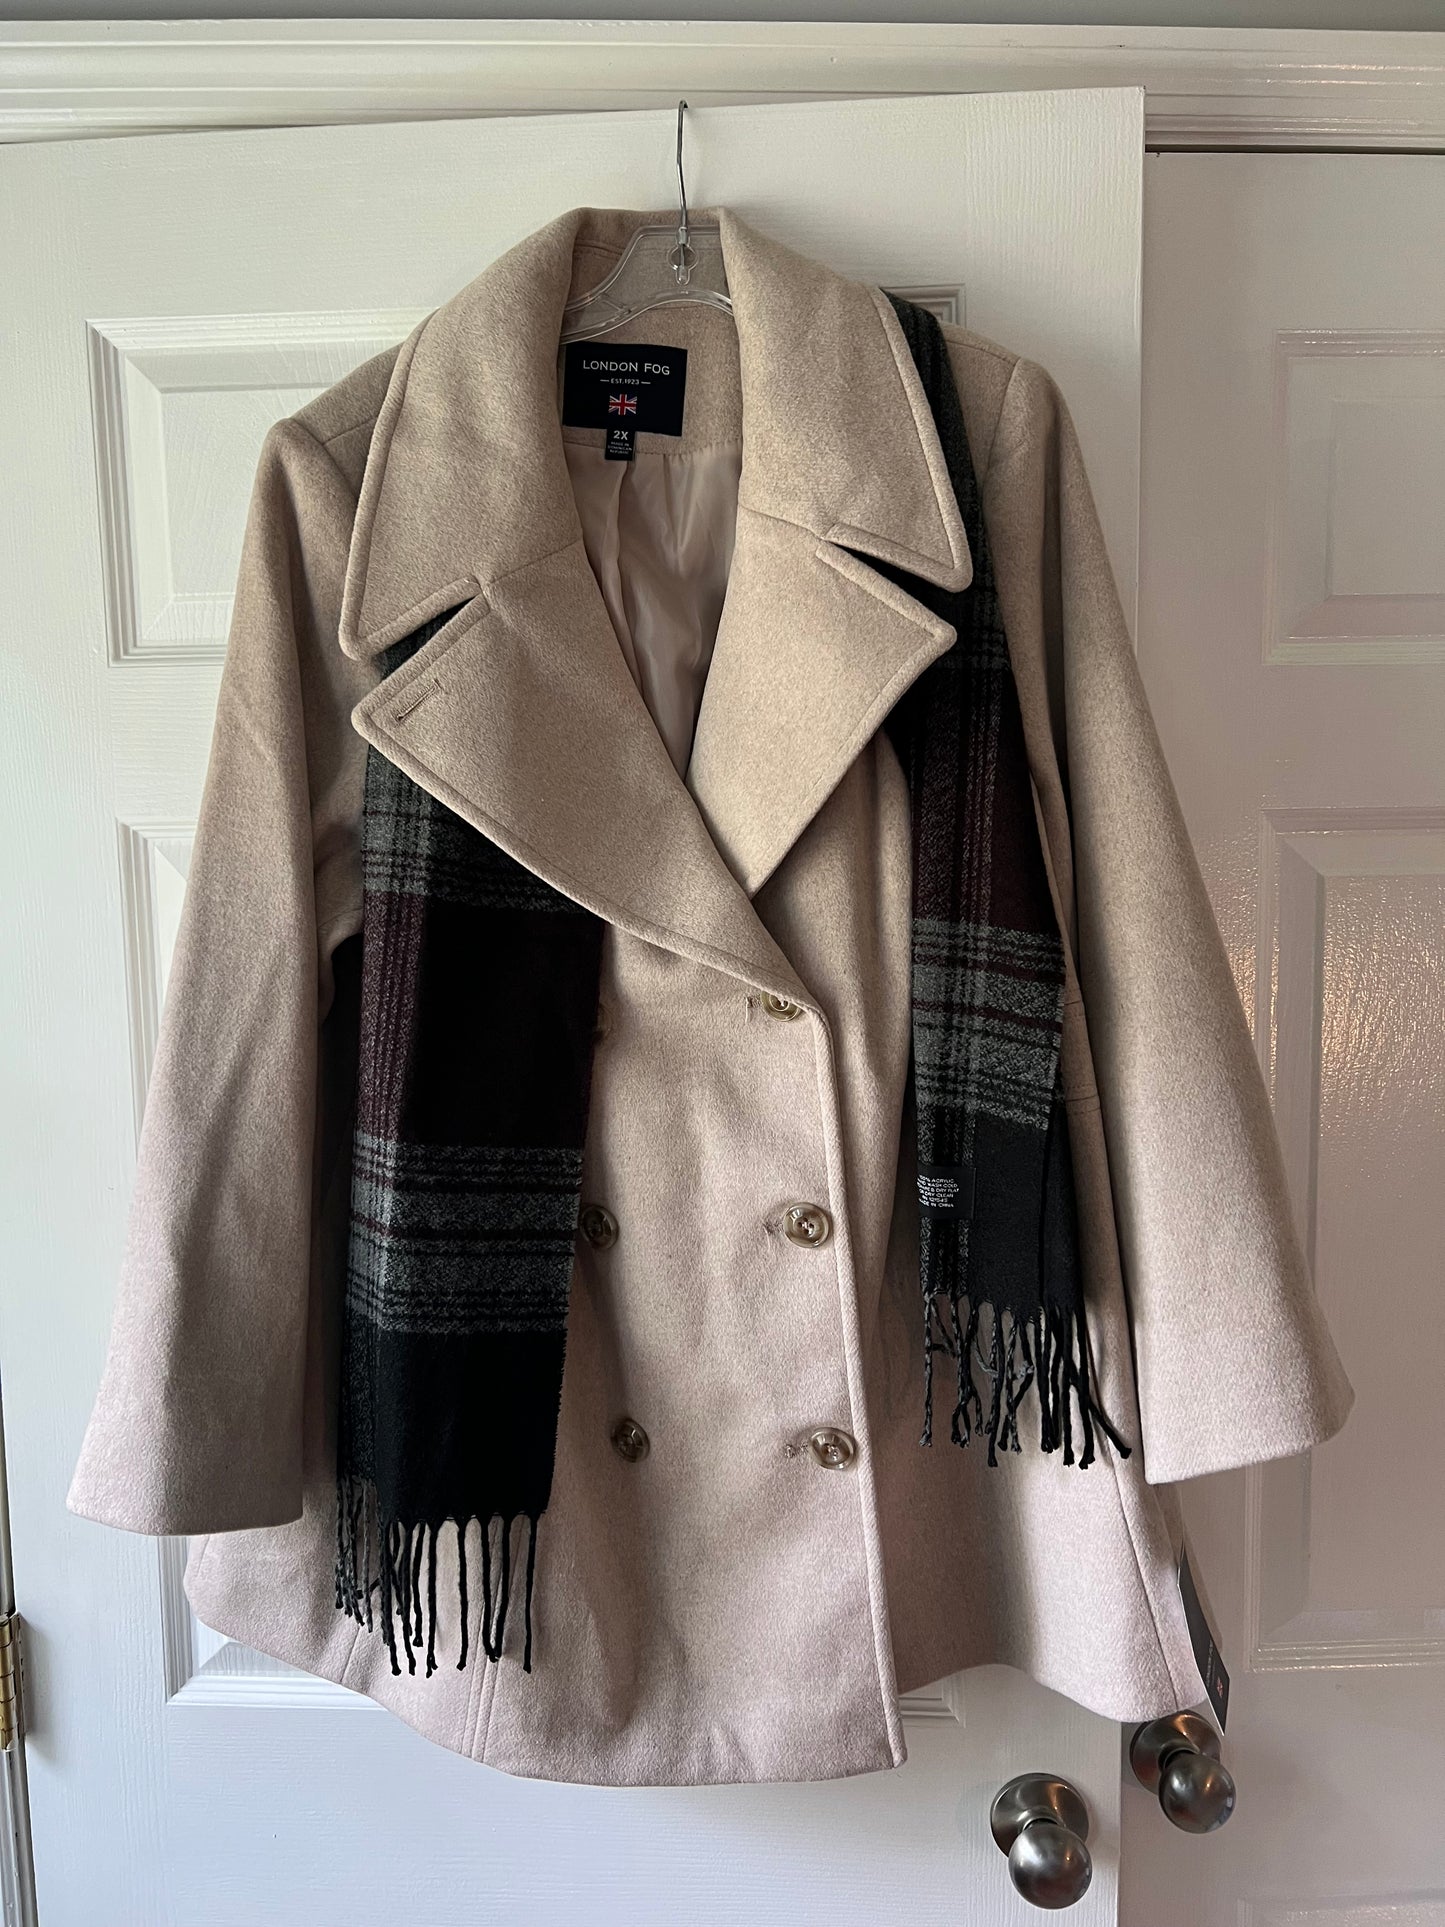 **REDUCED** NWT London Fog Women's Tan Pea Coat with Matching Plaid Scarf Size 2XL